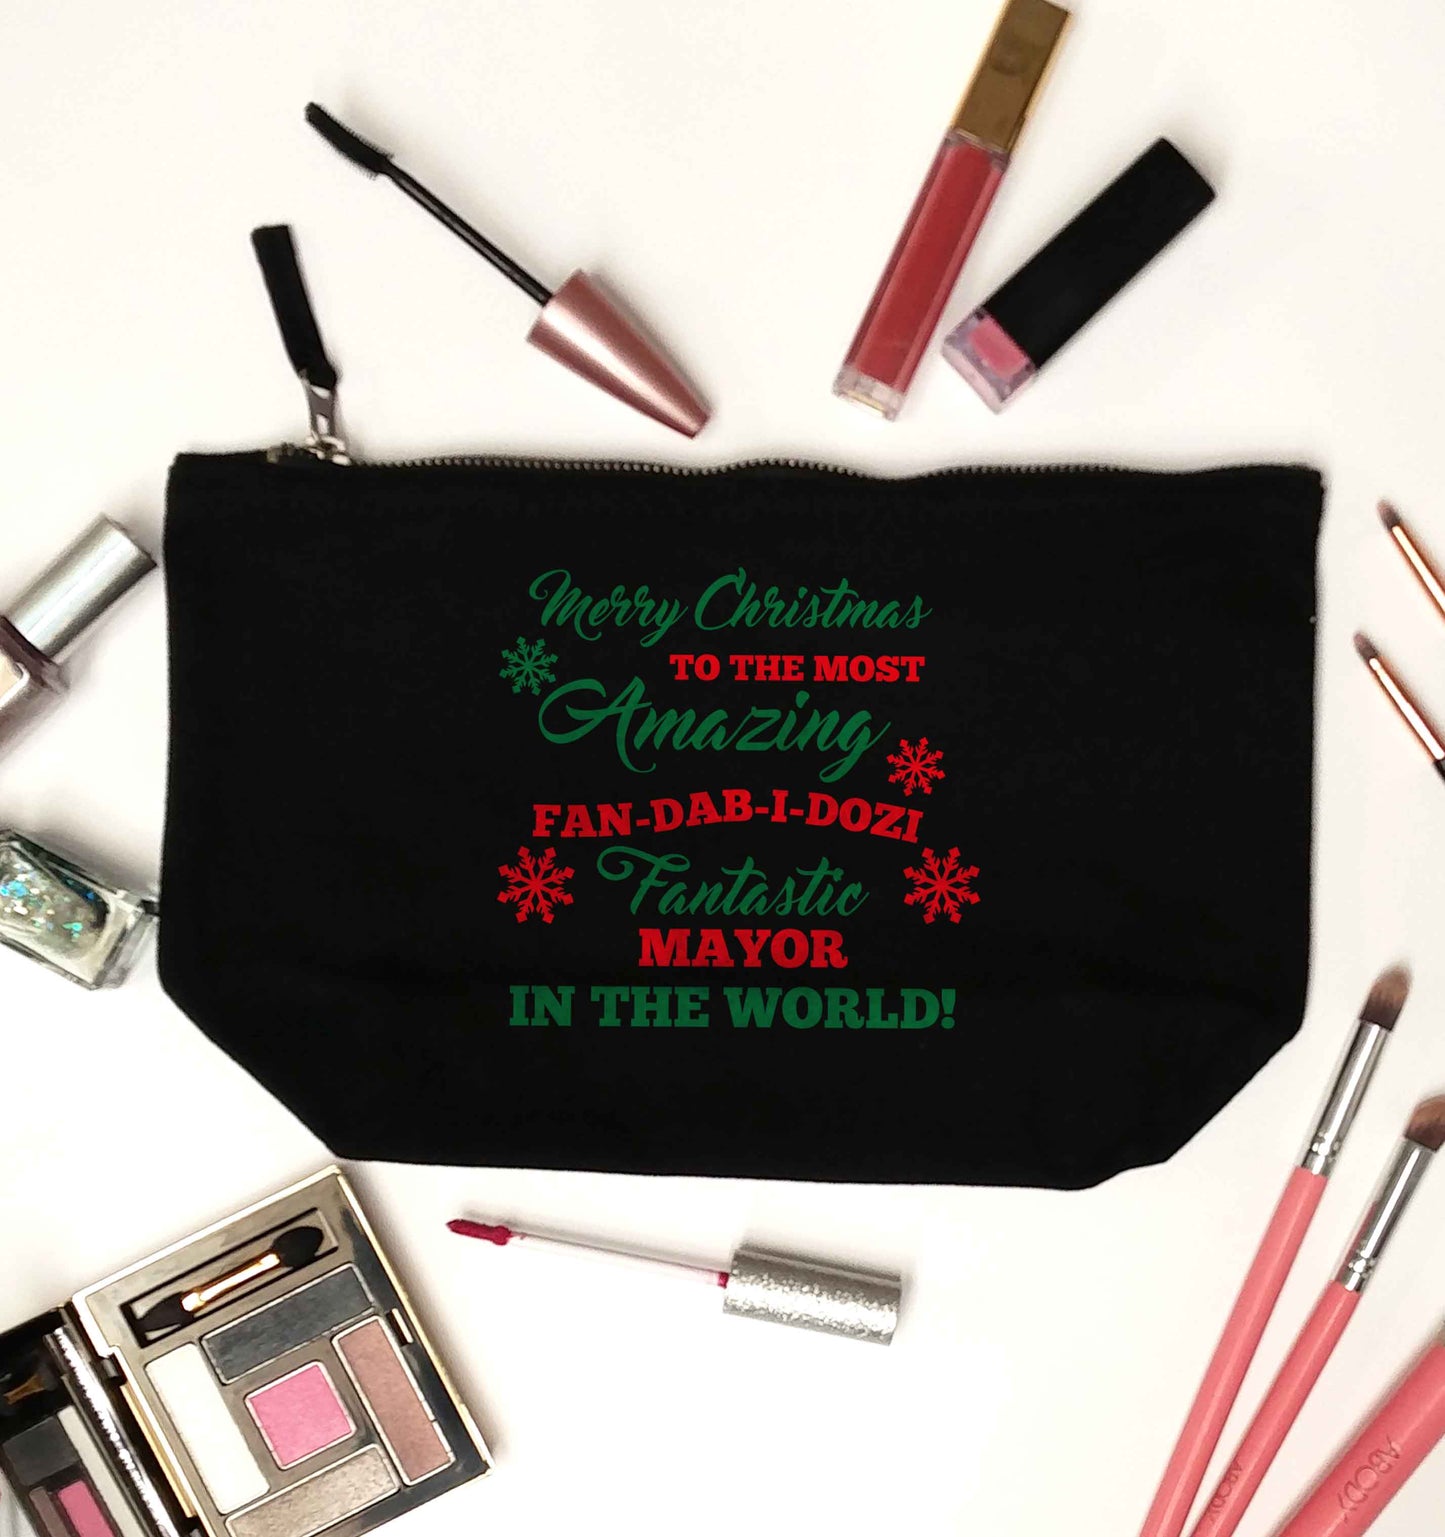 Merry Christmas to the most amazing fireman in the world! black makeup bag